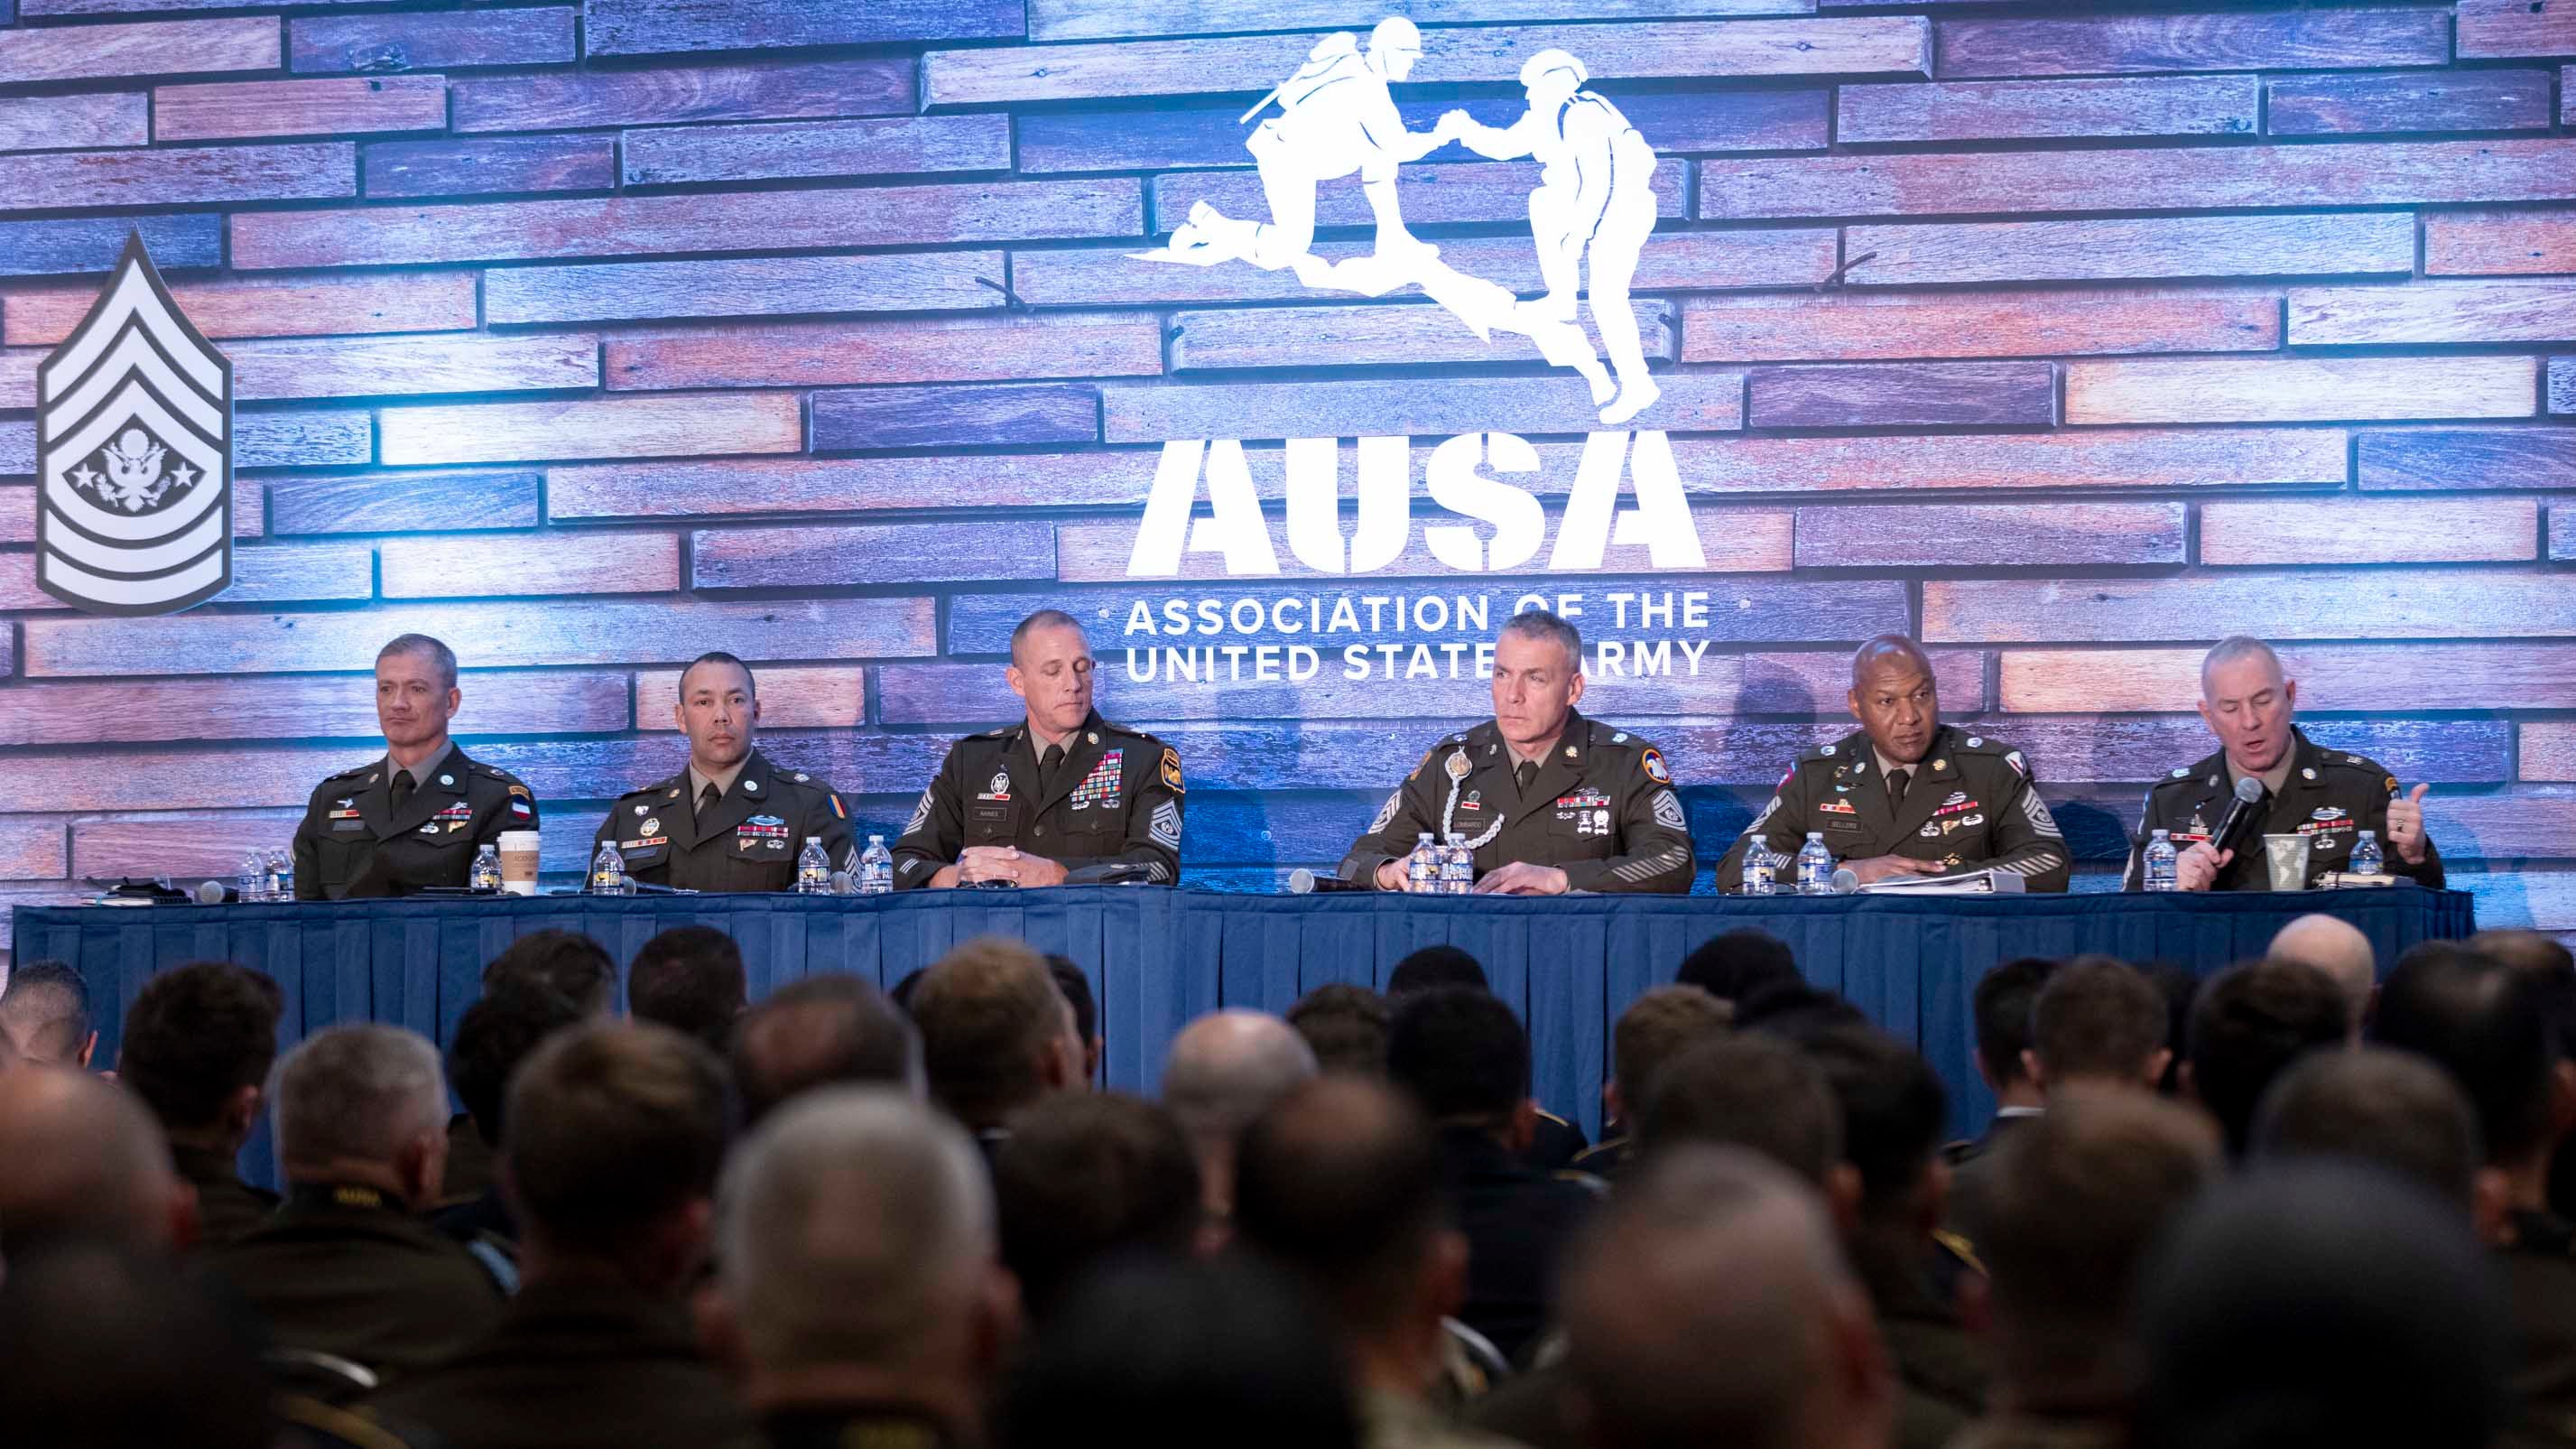 Sergeant Major of the Army’s Professional Development Forum at the AUSA 2023 Annual Meeting in Washington, D.C., Tuesday, Oct. 10, 2023. (Tasos Katopodis for AUSA)